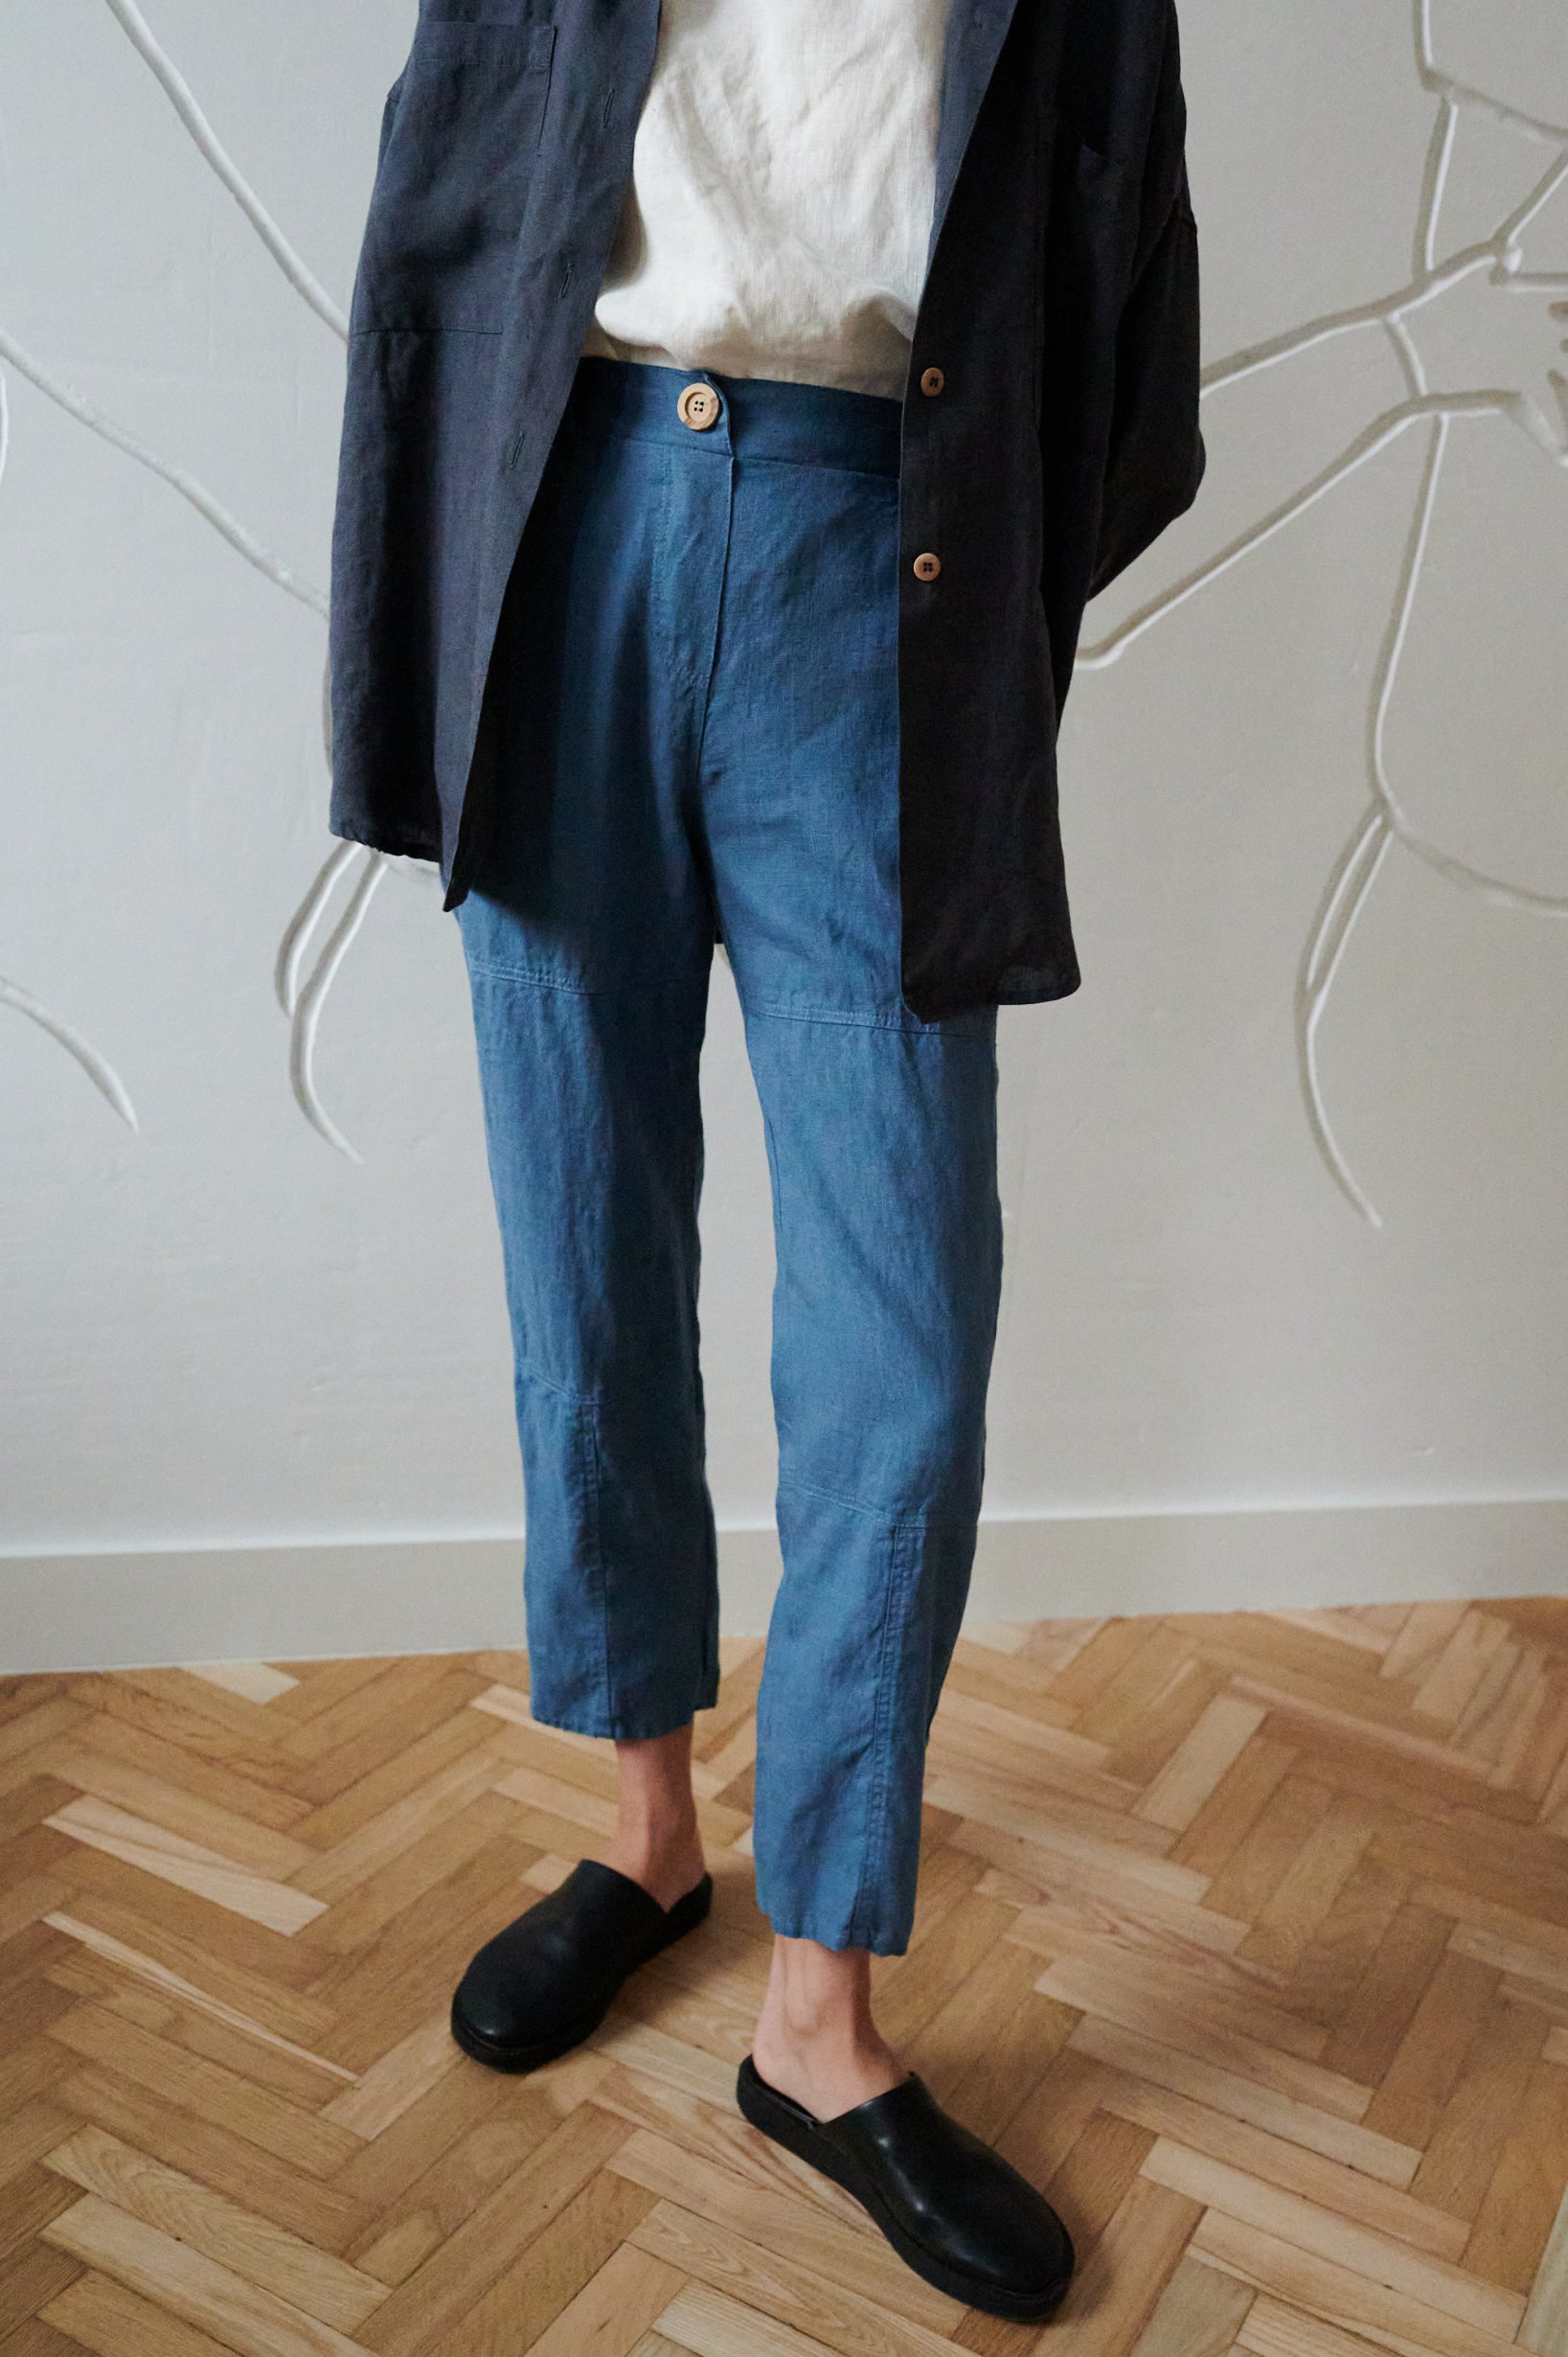 Blue high-waisted linen pants with a decorative button